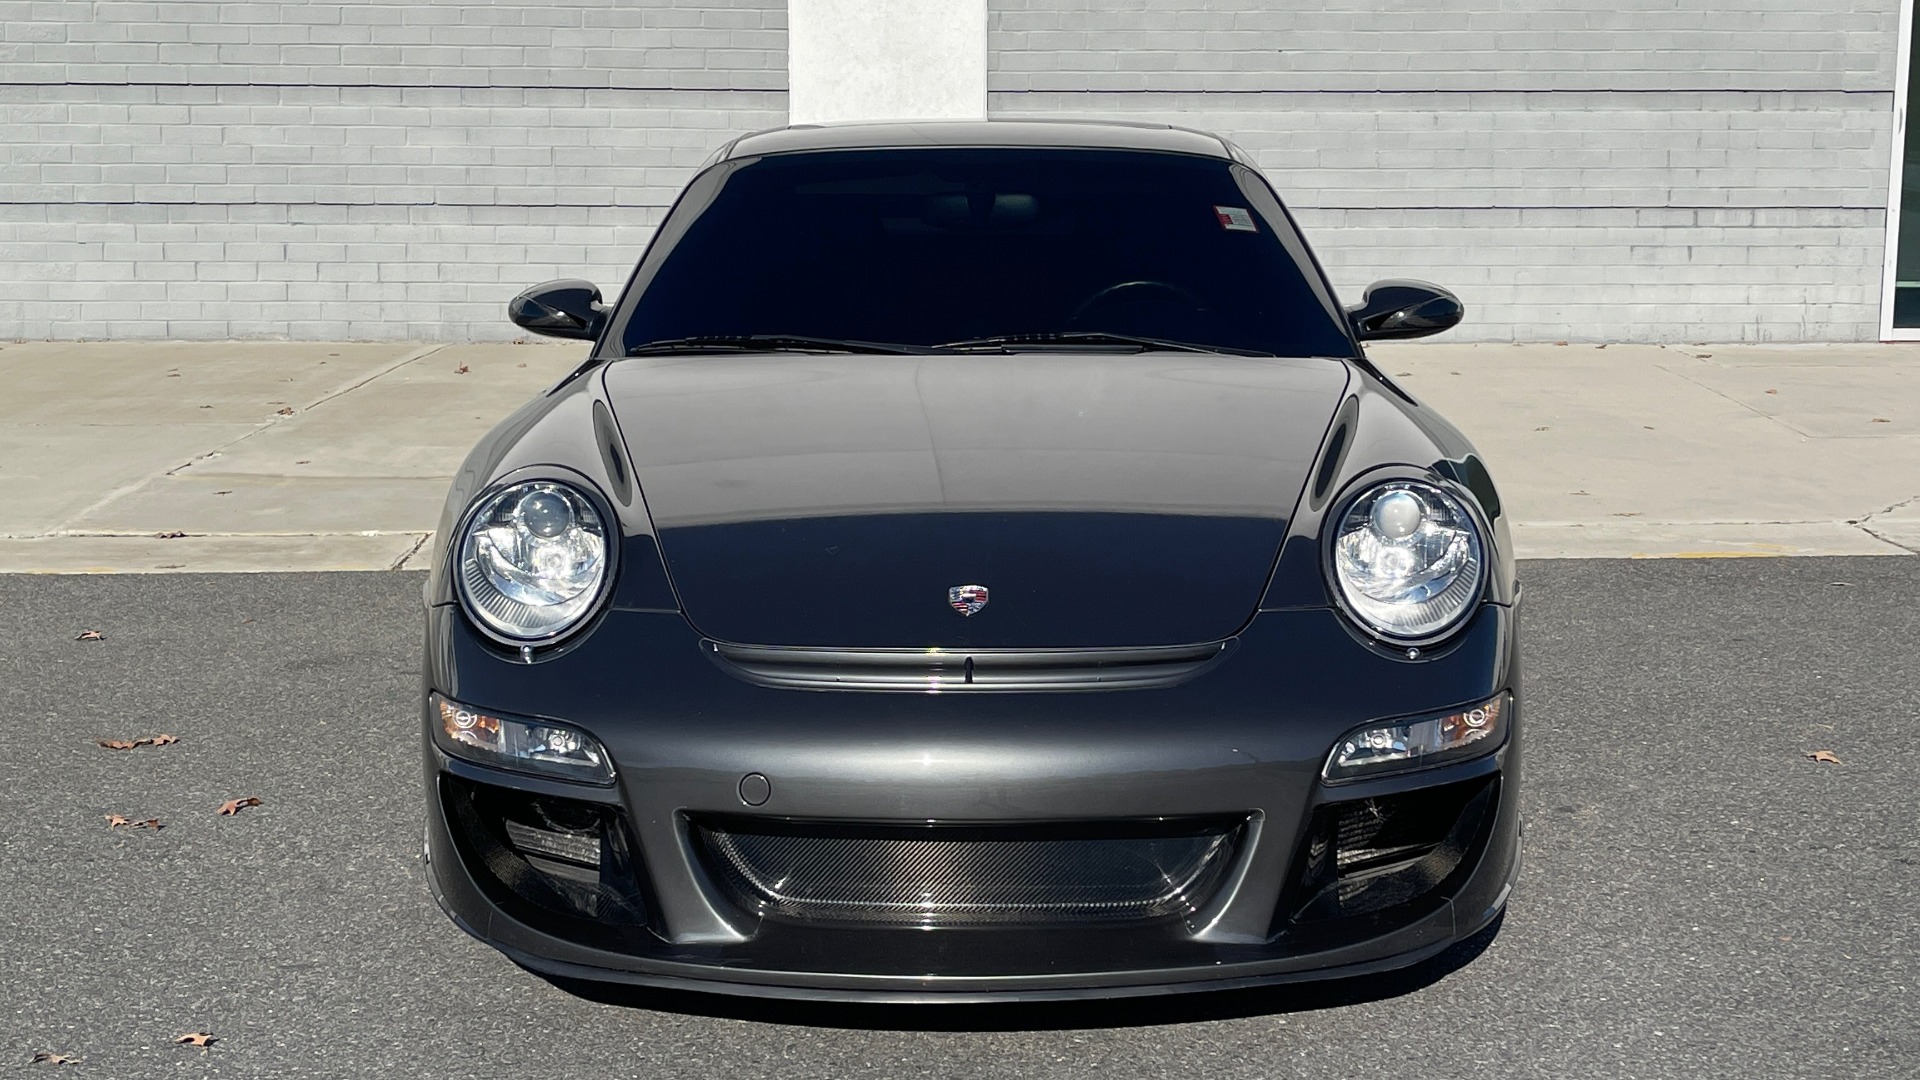 Used 2007 Porsche 911 CARRERA 4S / 3.8L H6 / 6-SPD MANUAL / HTD STS / SPORT CHRONO / BODY KIT for sale Sold at Formula Imports in Charlotte NC 28227 10